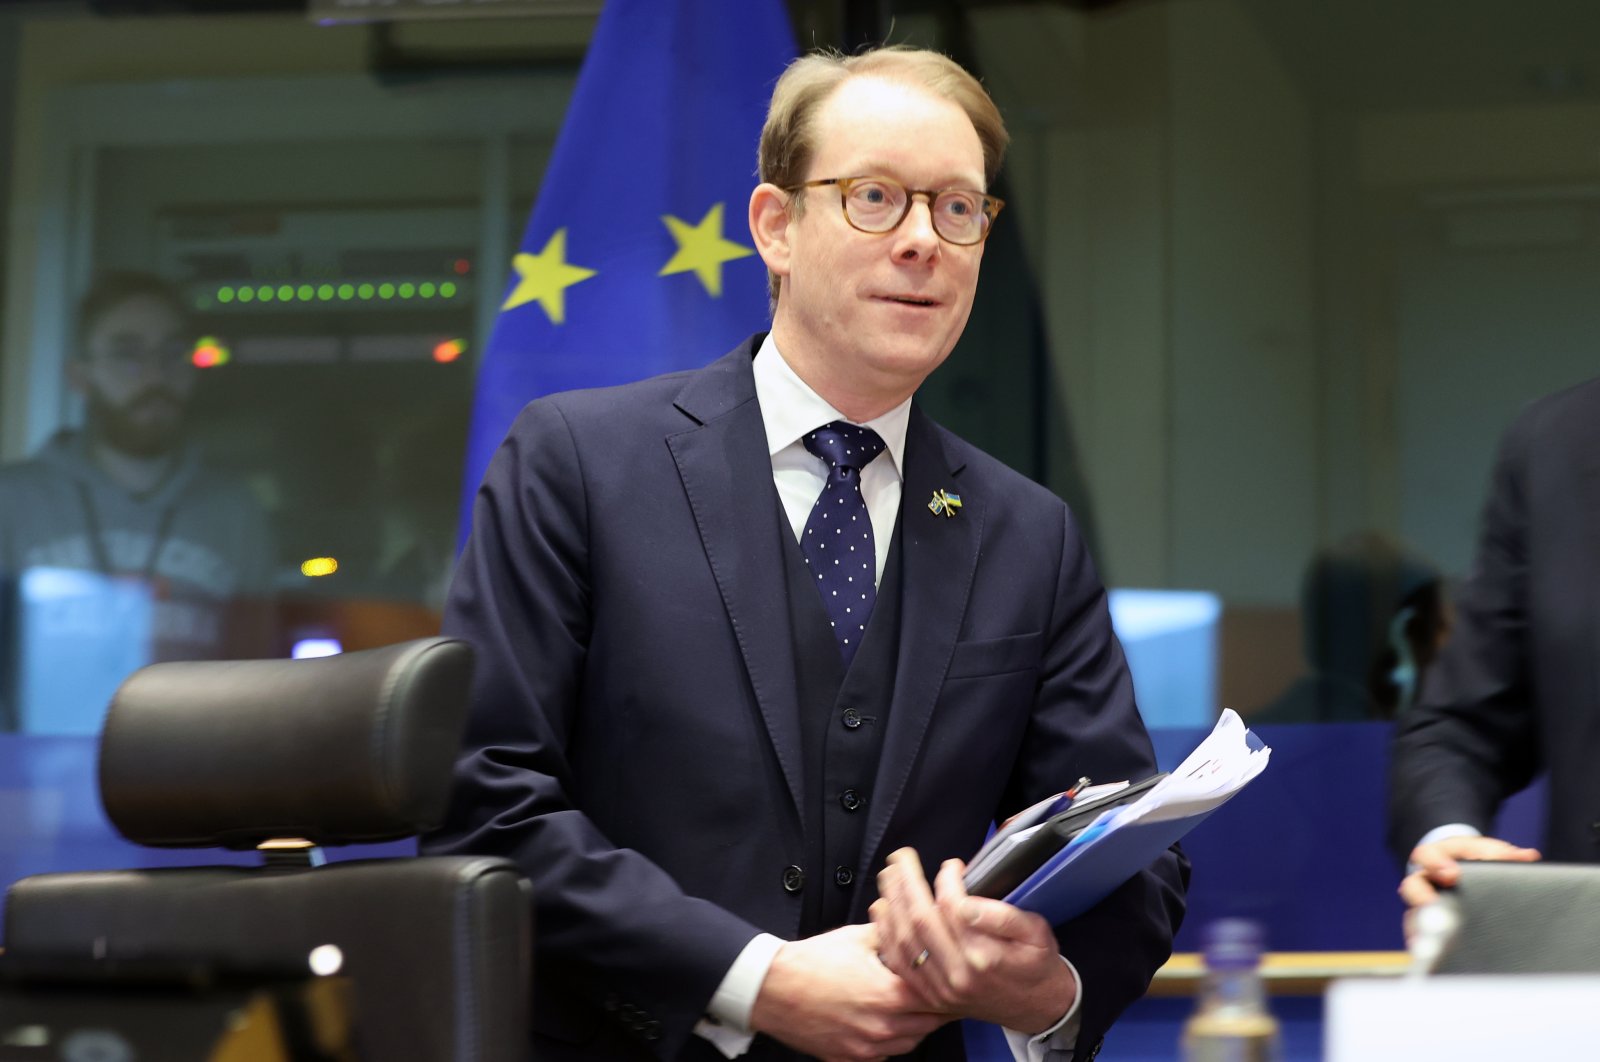 Swedish Foreign Minister Tobias Billström speaks at an event at the European Parliament, Jan. 24, 2023. (AA File Photo)